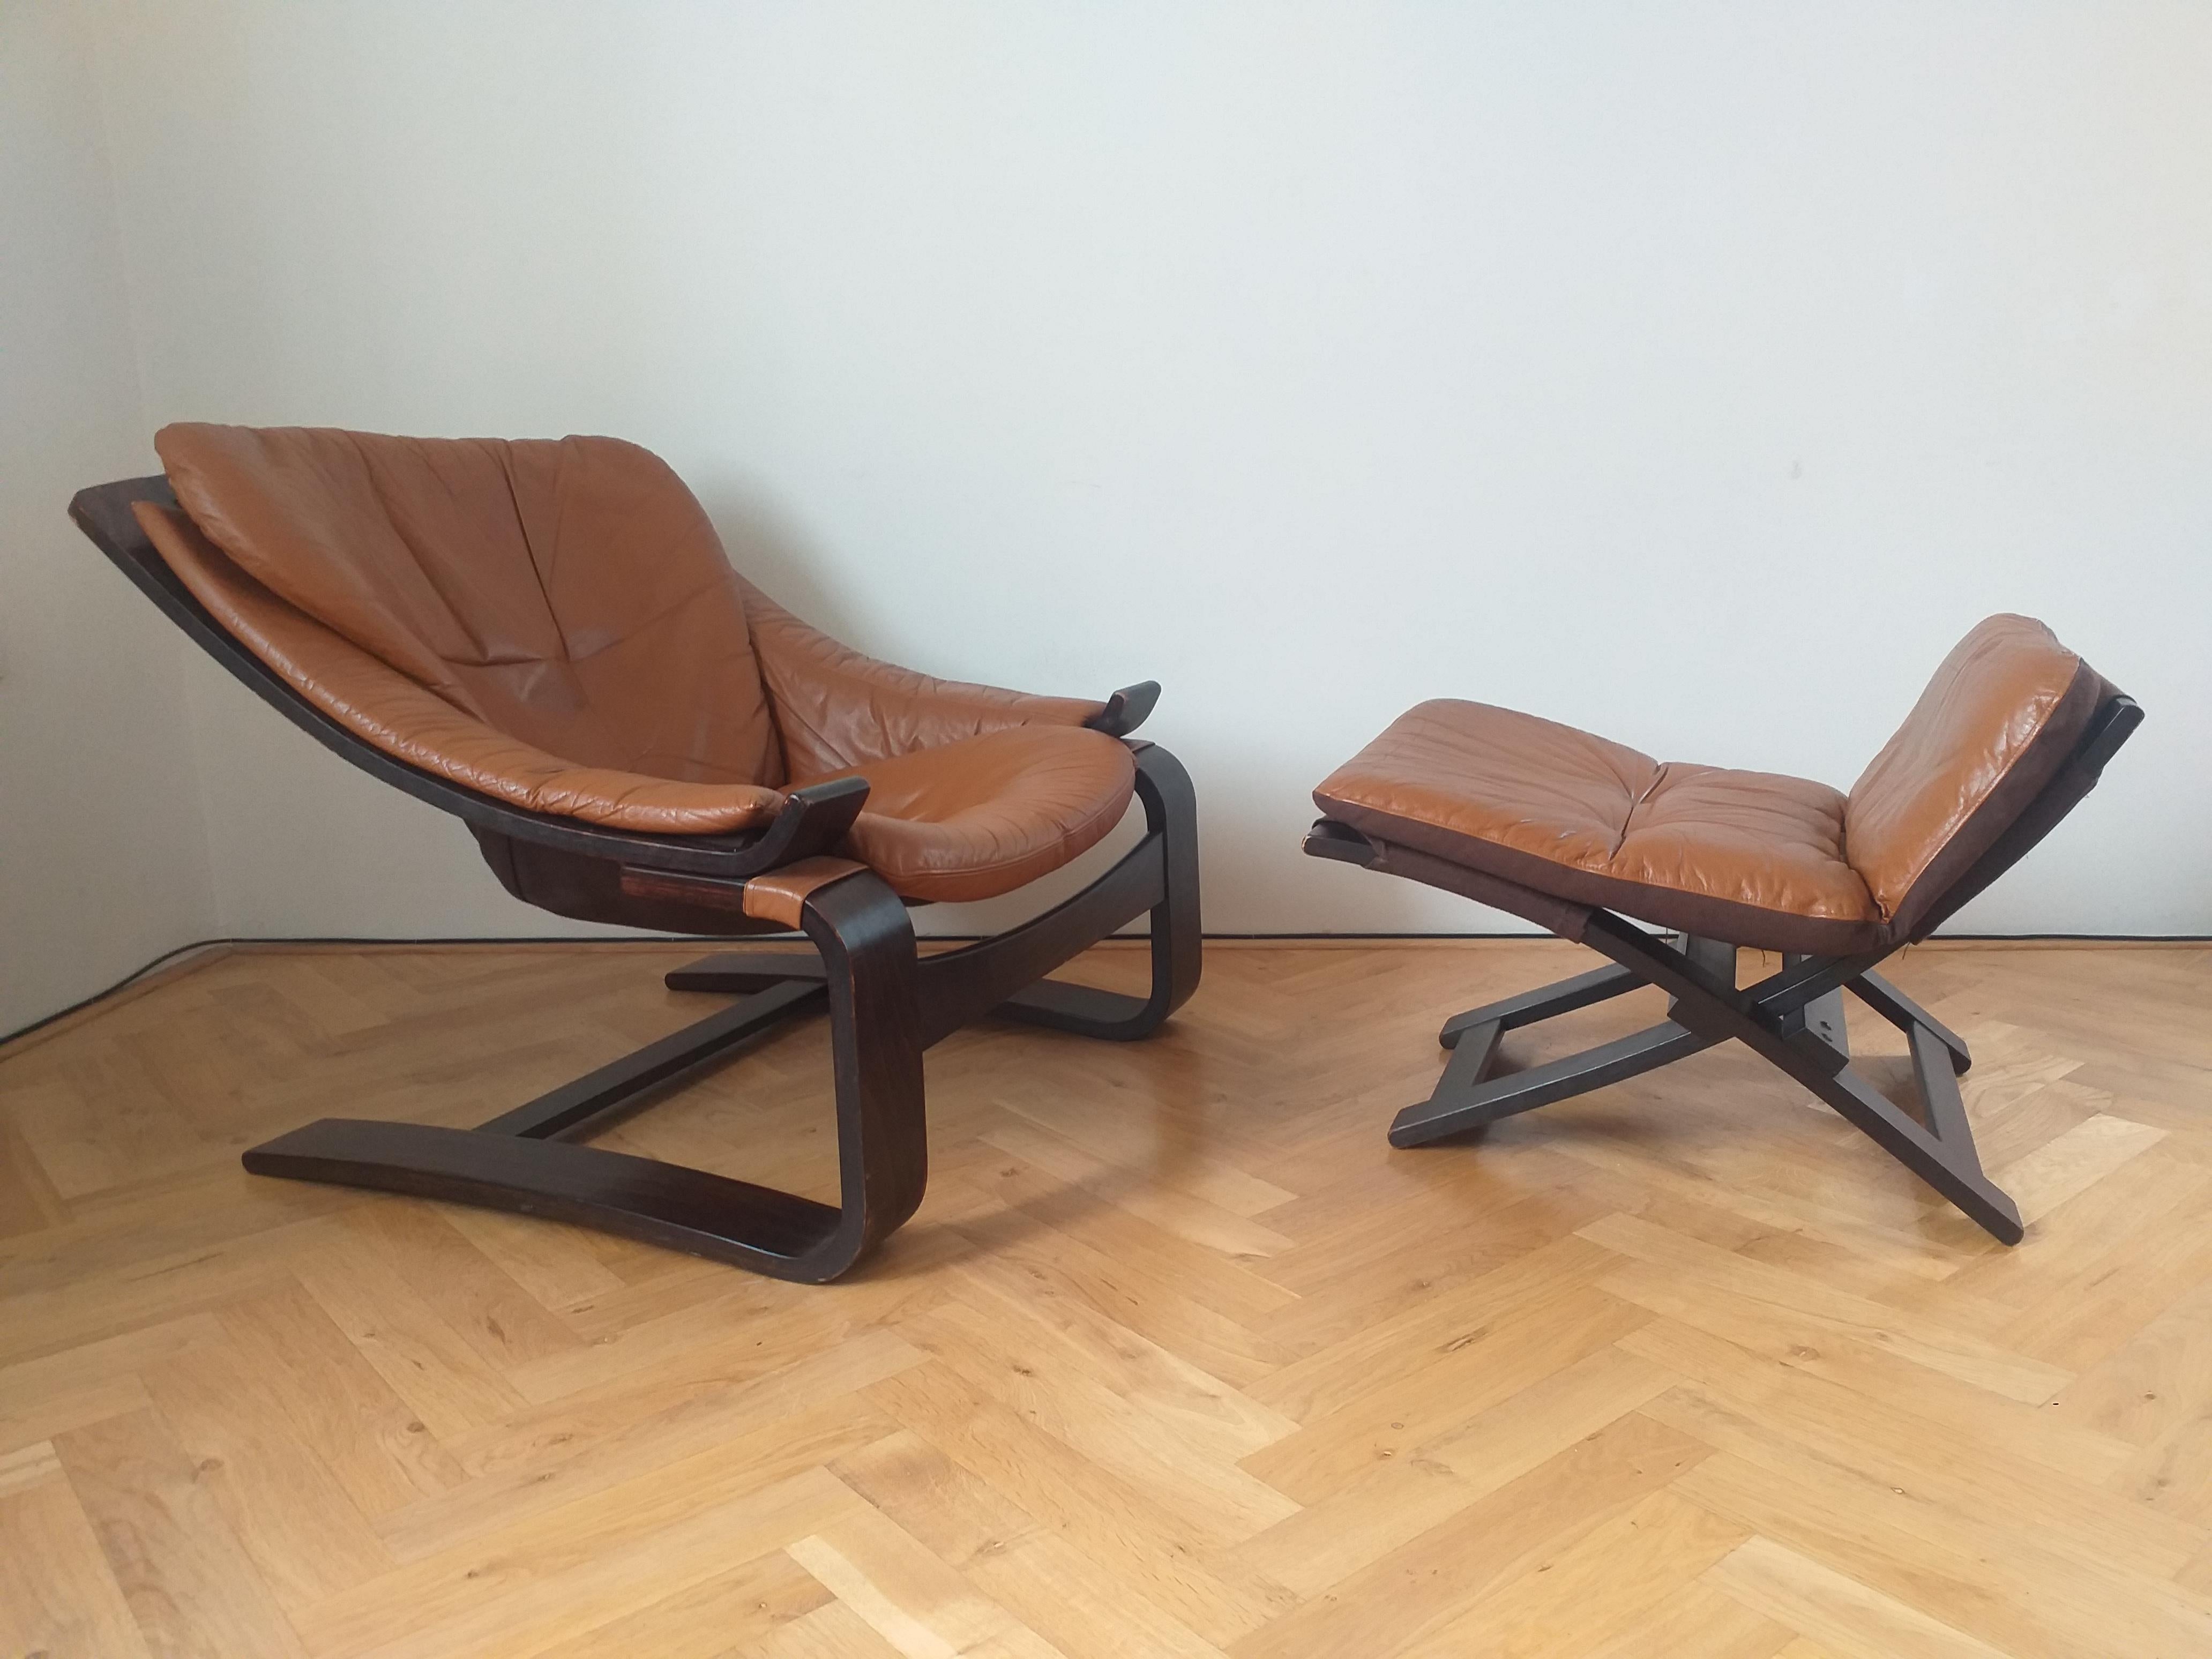 Midcentury Lounge Chair Kroken with Ottoman, Ake Fribytter, Nelo, Sweden, 1970s For Sale 4